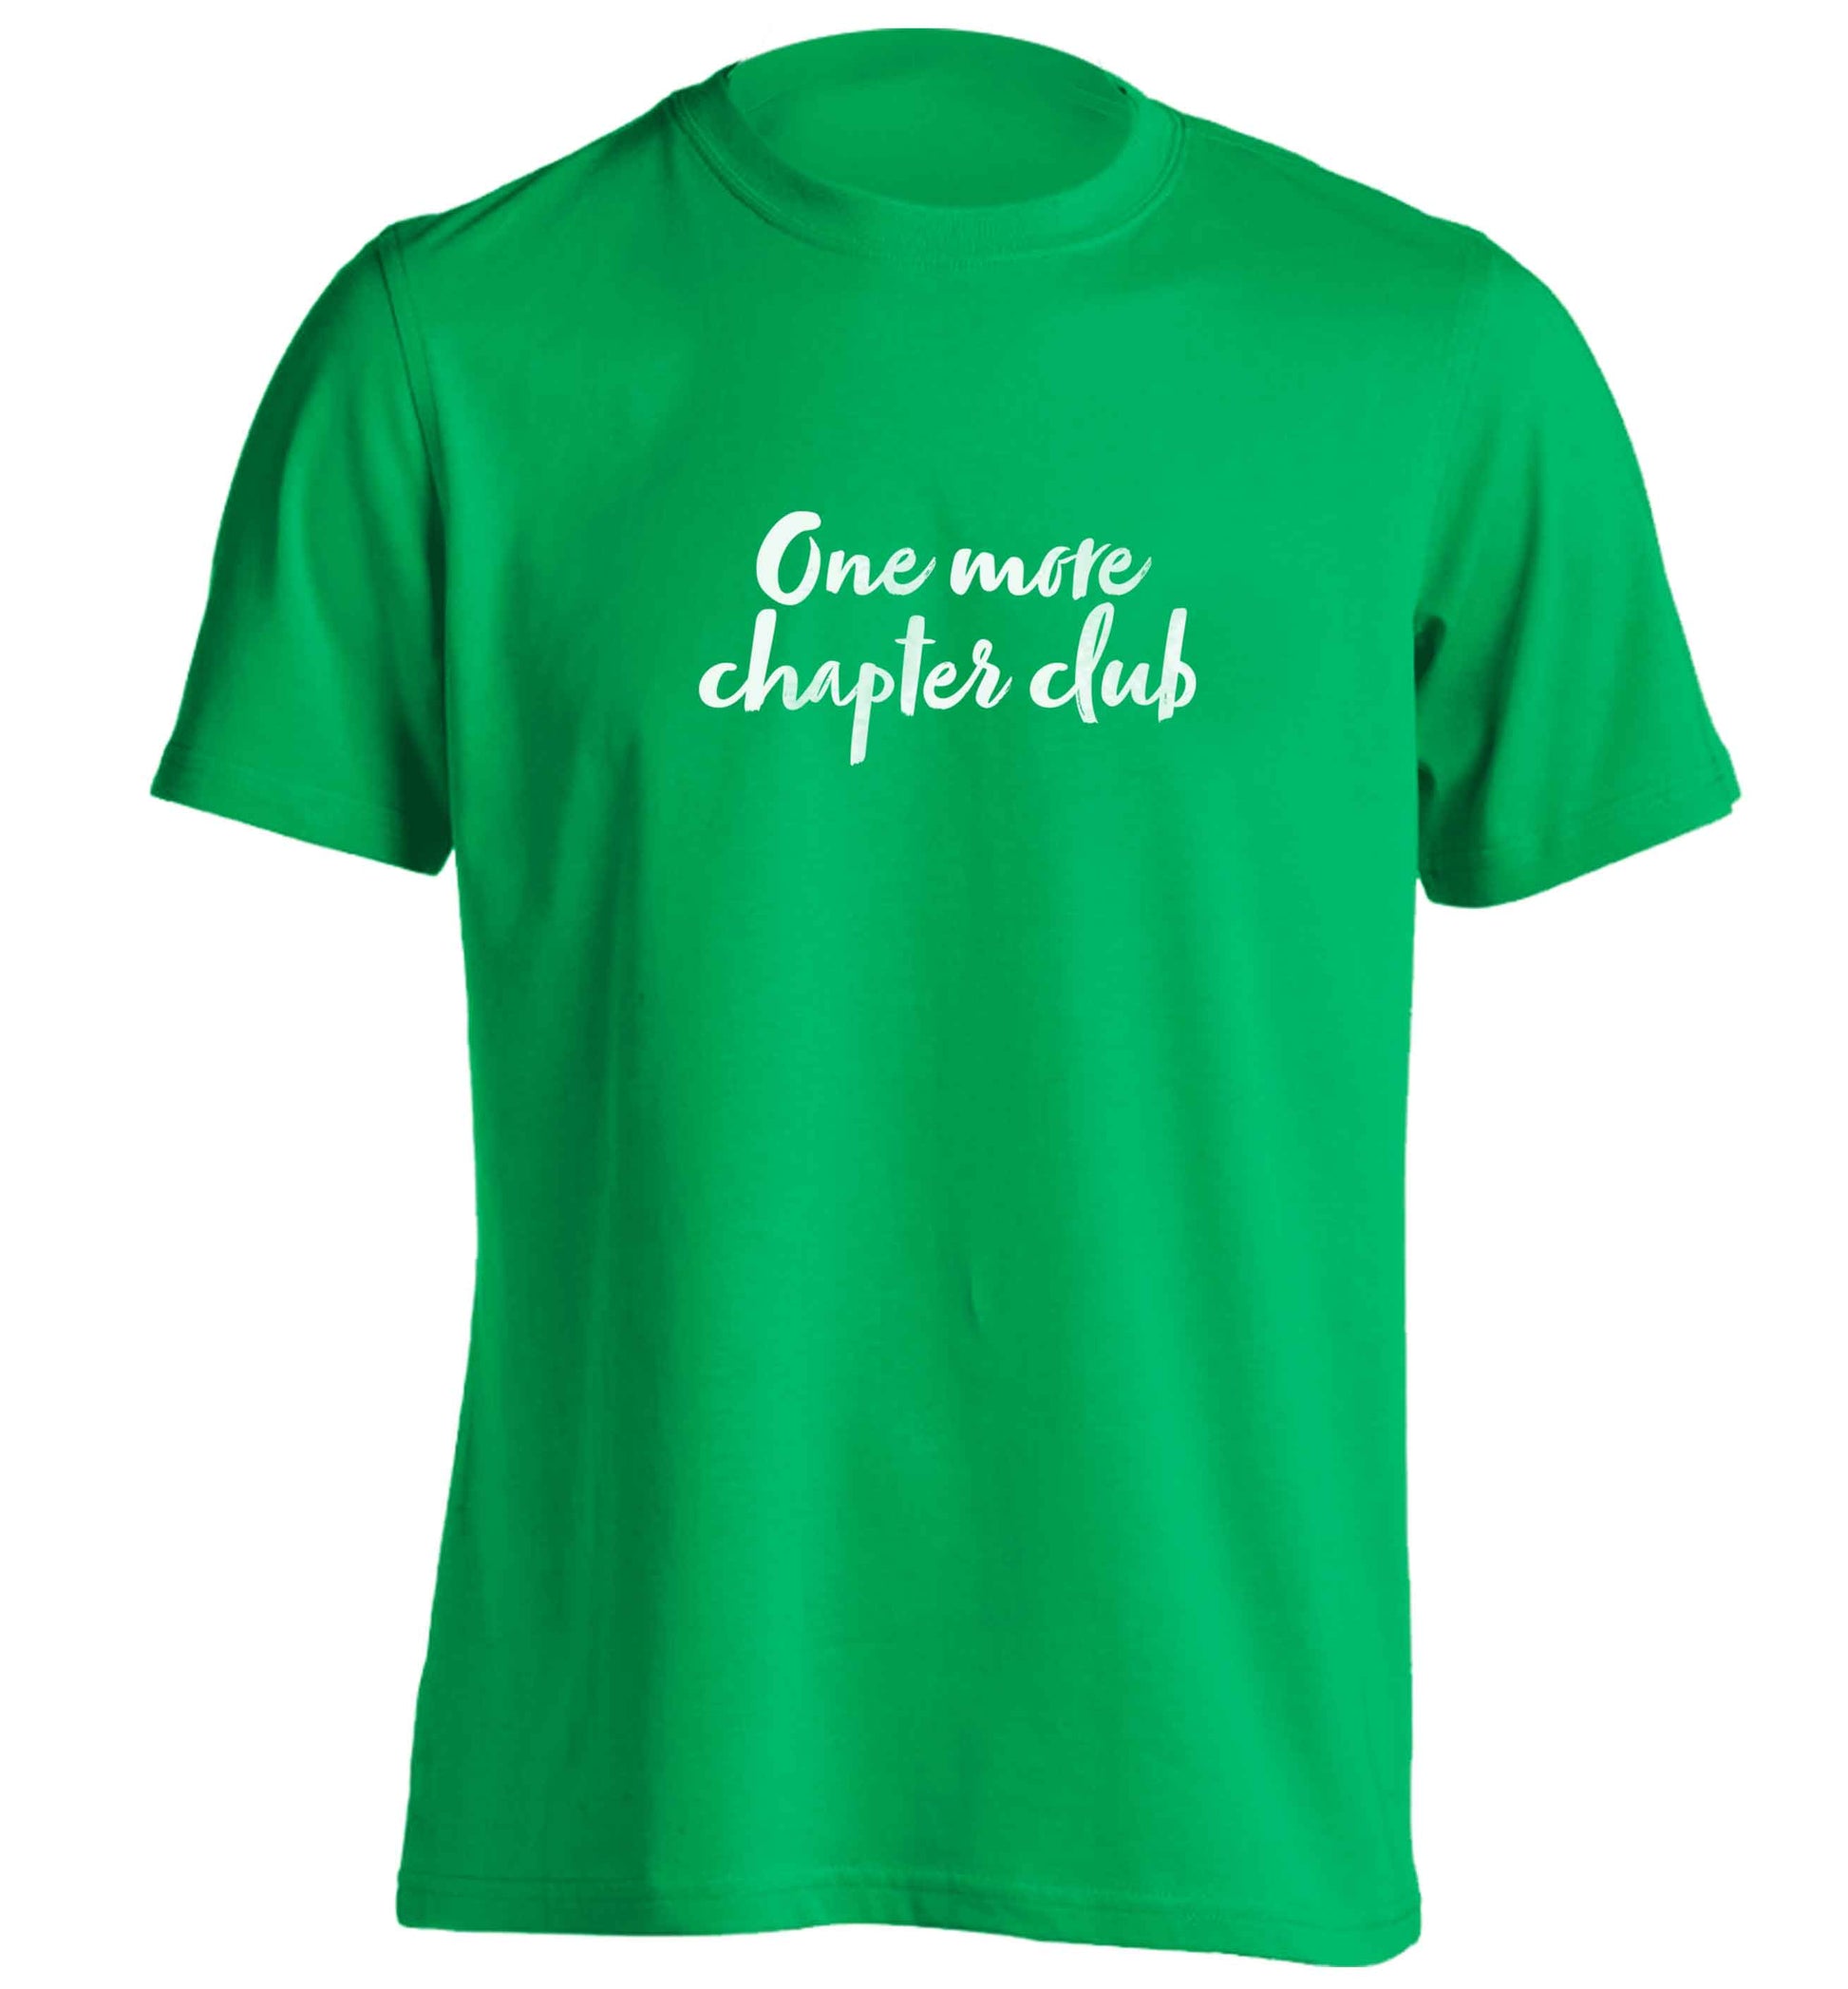 One more chapter club Kit adults unisex green Tshirt 2XL